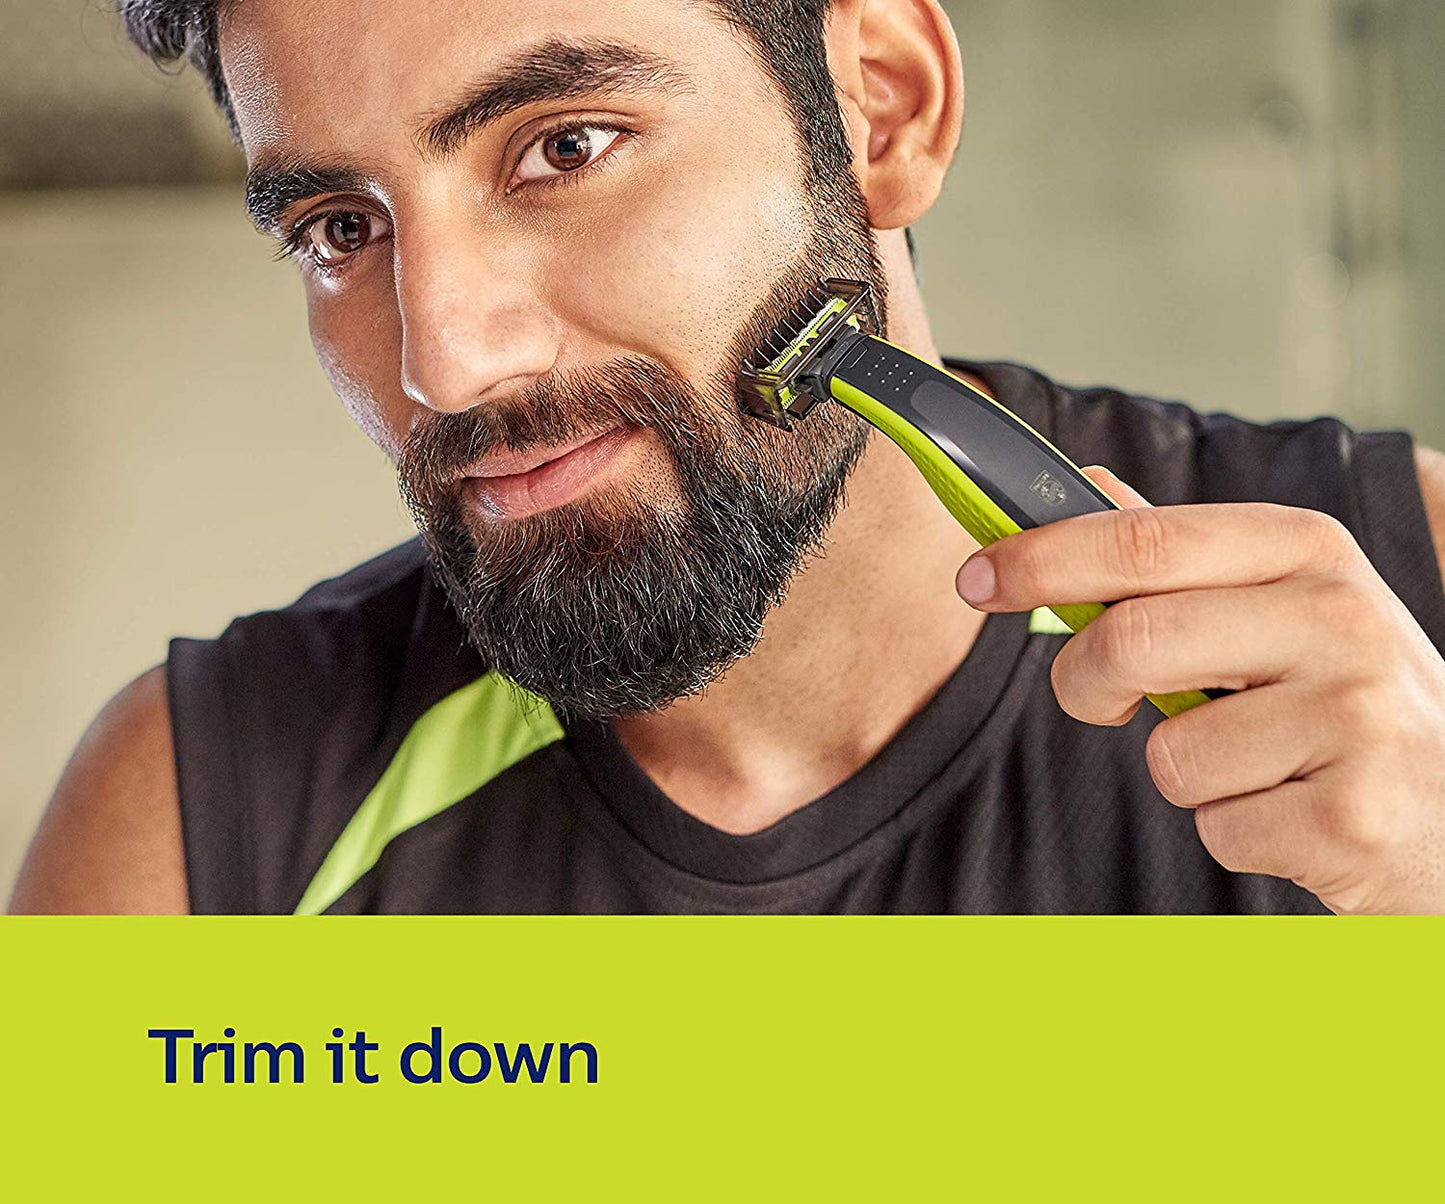 Philips QP2525/10 OneBlade Hybrid Trimmer and Shaver with 3 Trimming Combs (Lime Green)